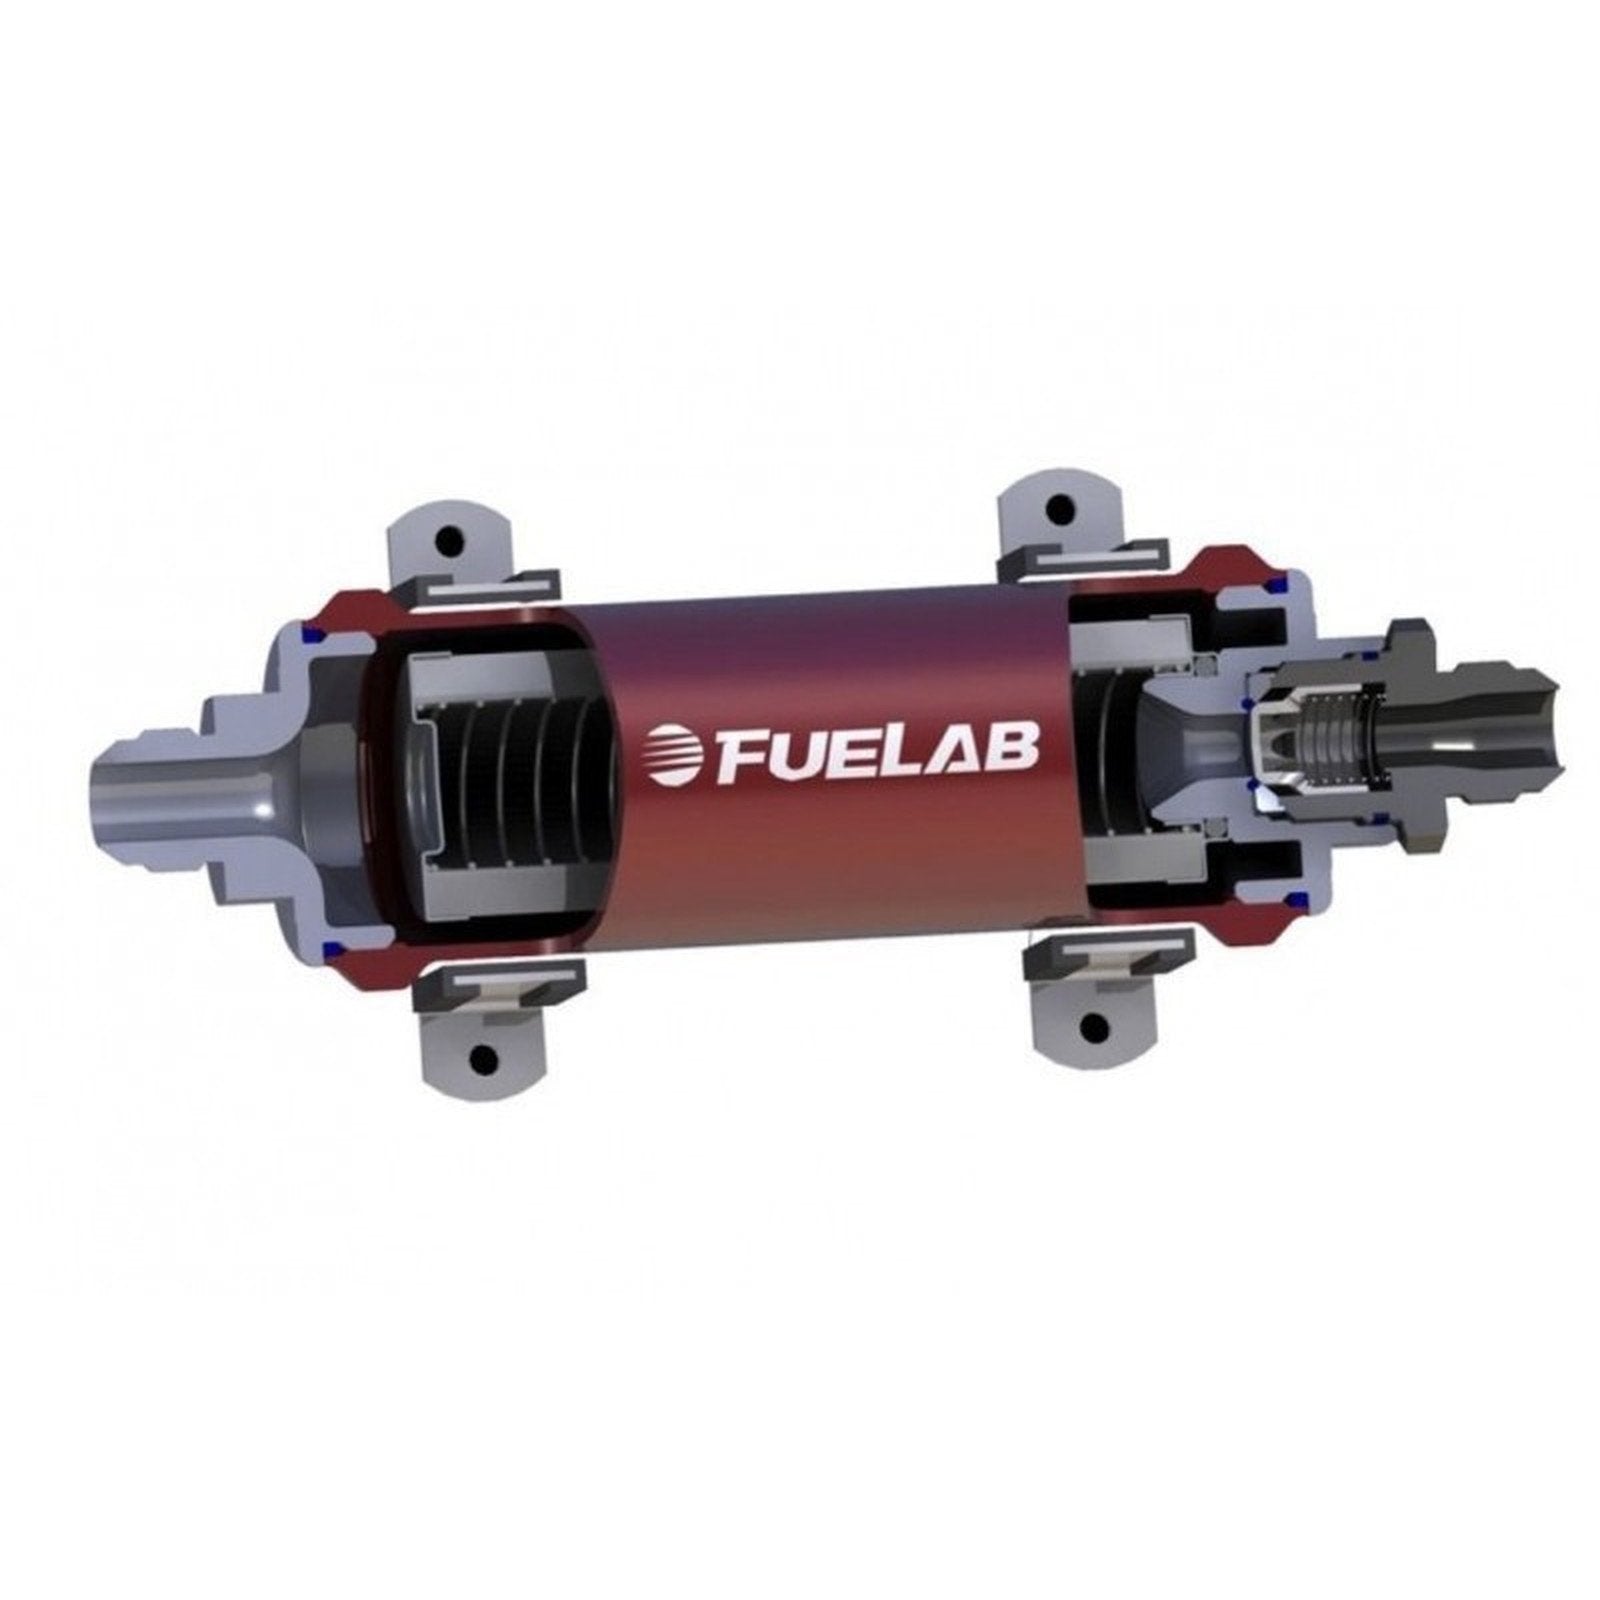 FUELAB external fuel filter with check valve (various sizes) - PARTS33 GmbH